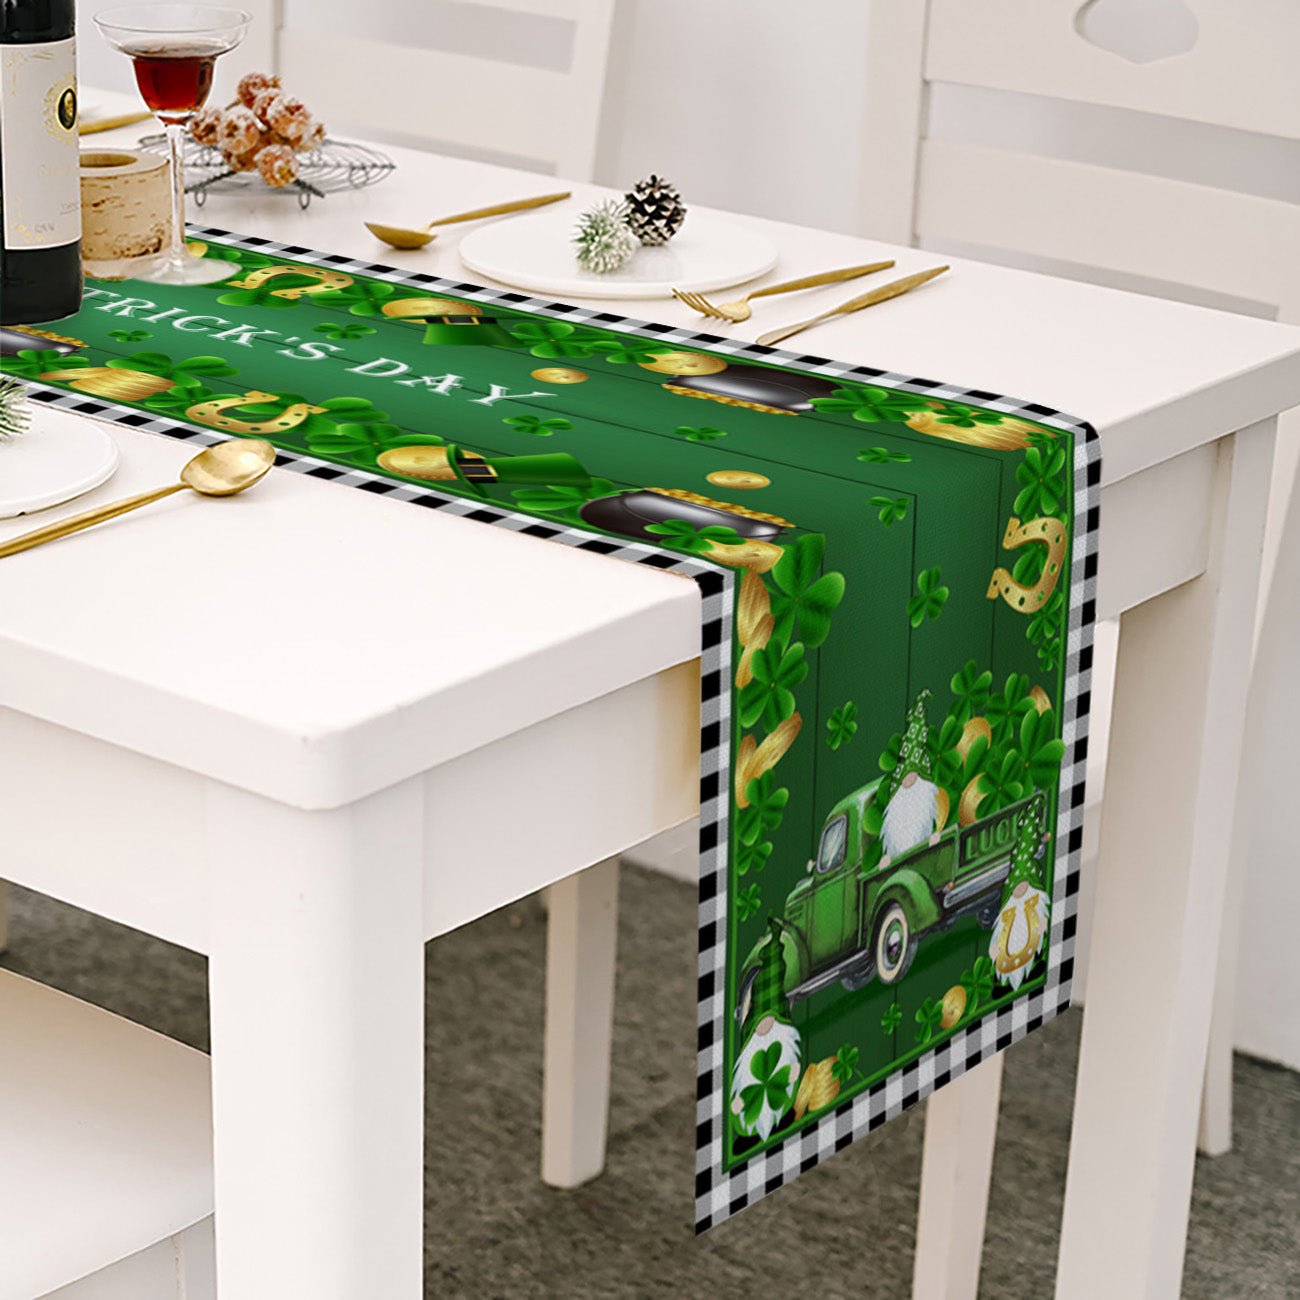 3 Lucky Gnomes - St. Patrick's Day Green Table Runner